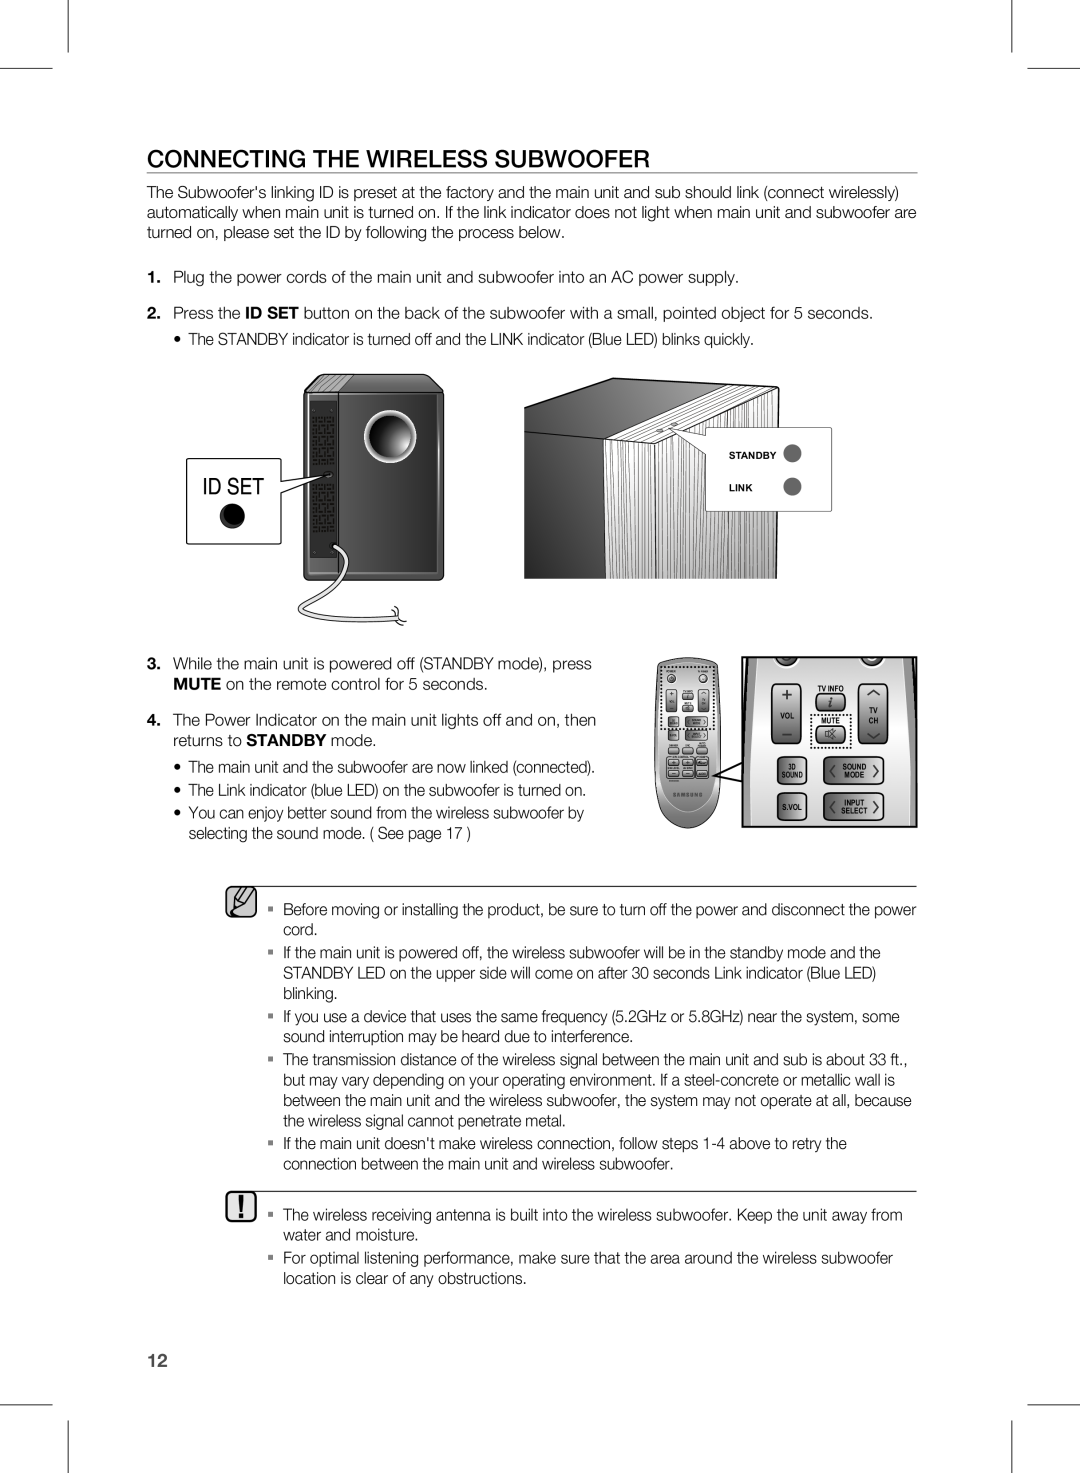 Siemens HW-D450 user manual cOnnEcTing THE WiRElESS SUBWOOFER 